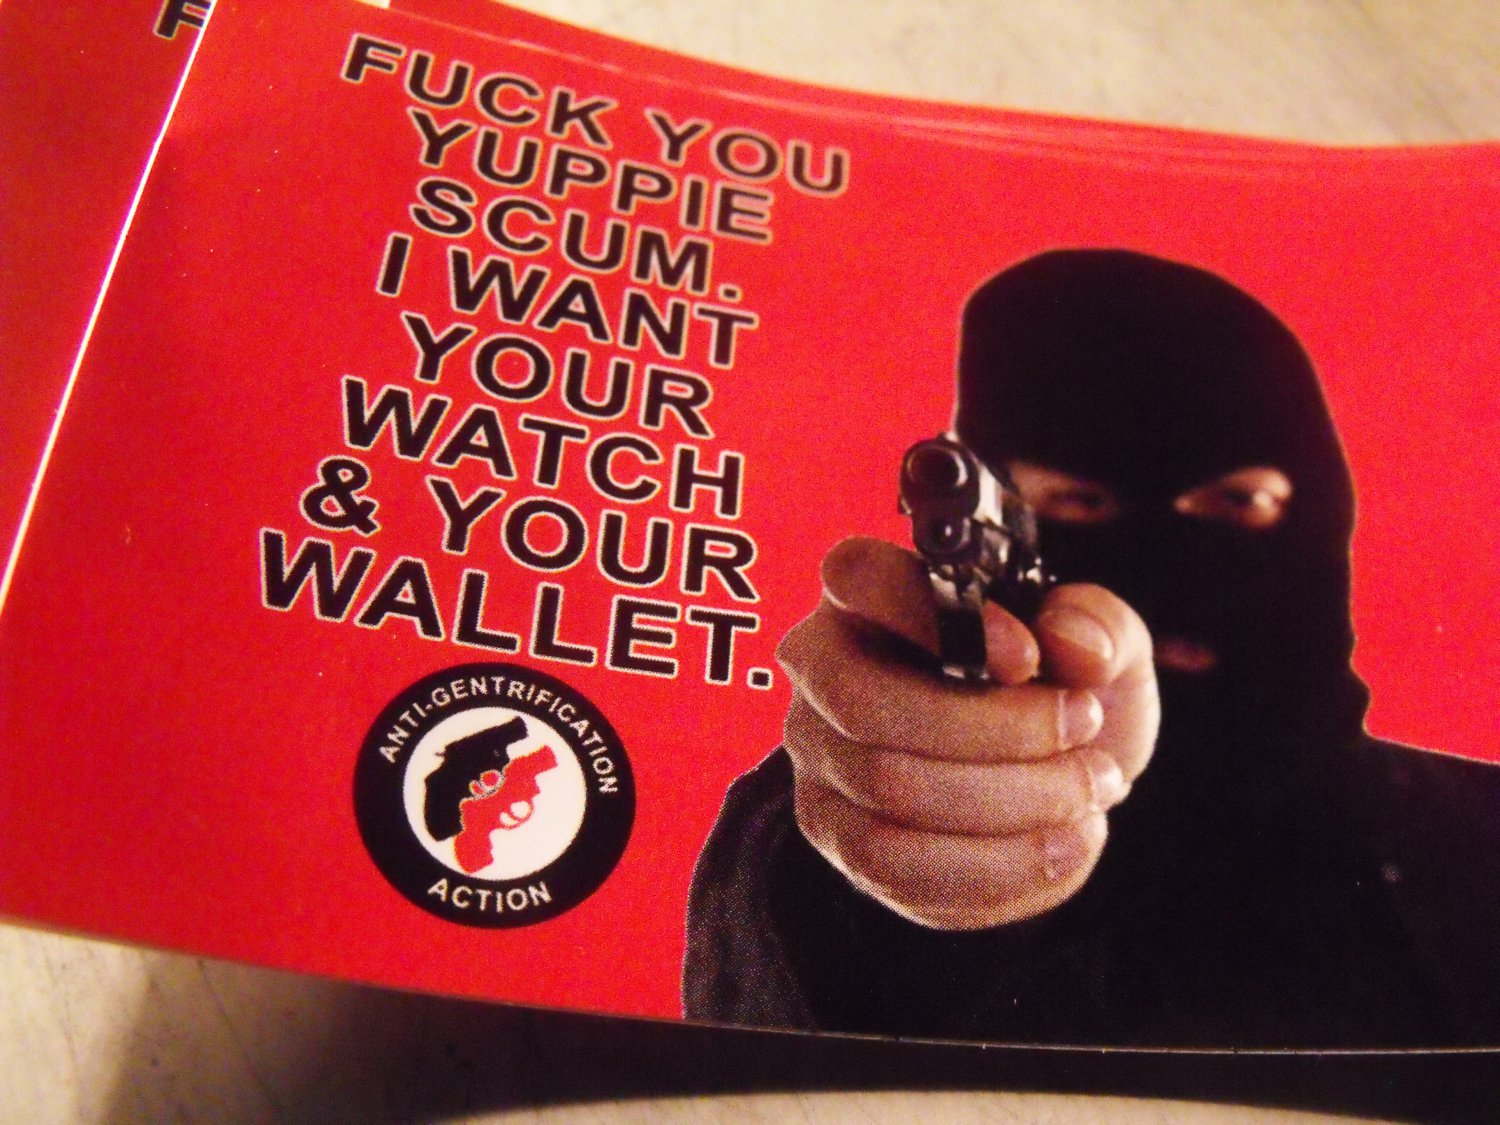 300 FUCK YOU YUPPIE SCUM.  I WANT YOUR WATCH & YOUR WALLET.  3.5" x 2.25"  stickers